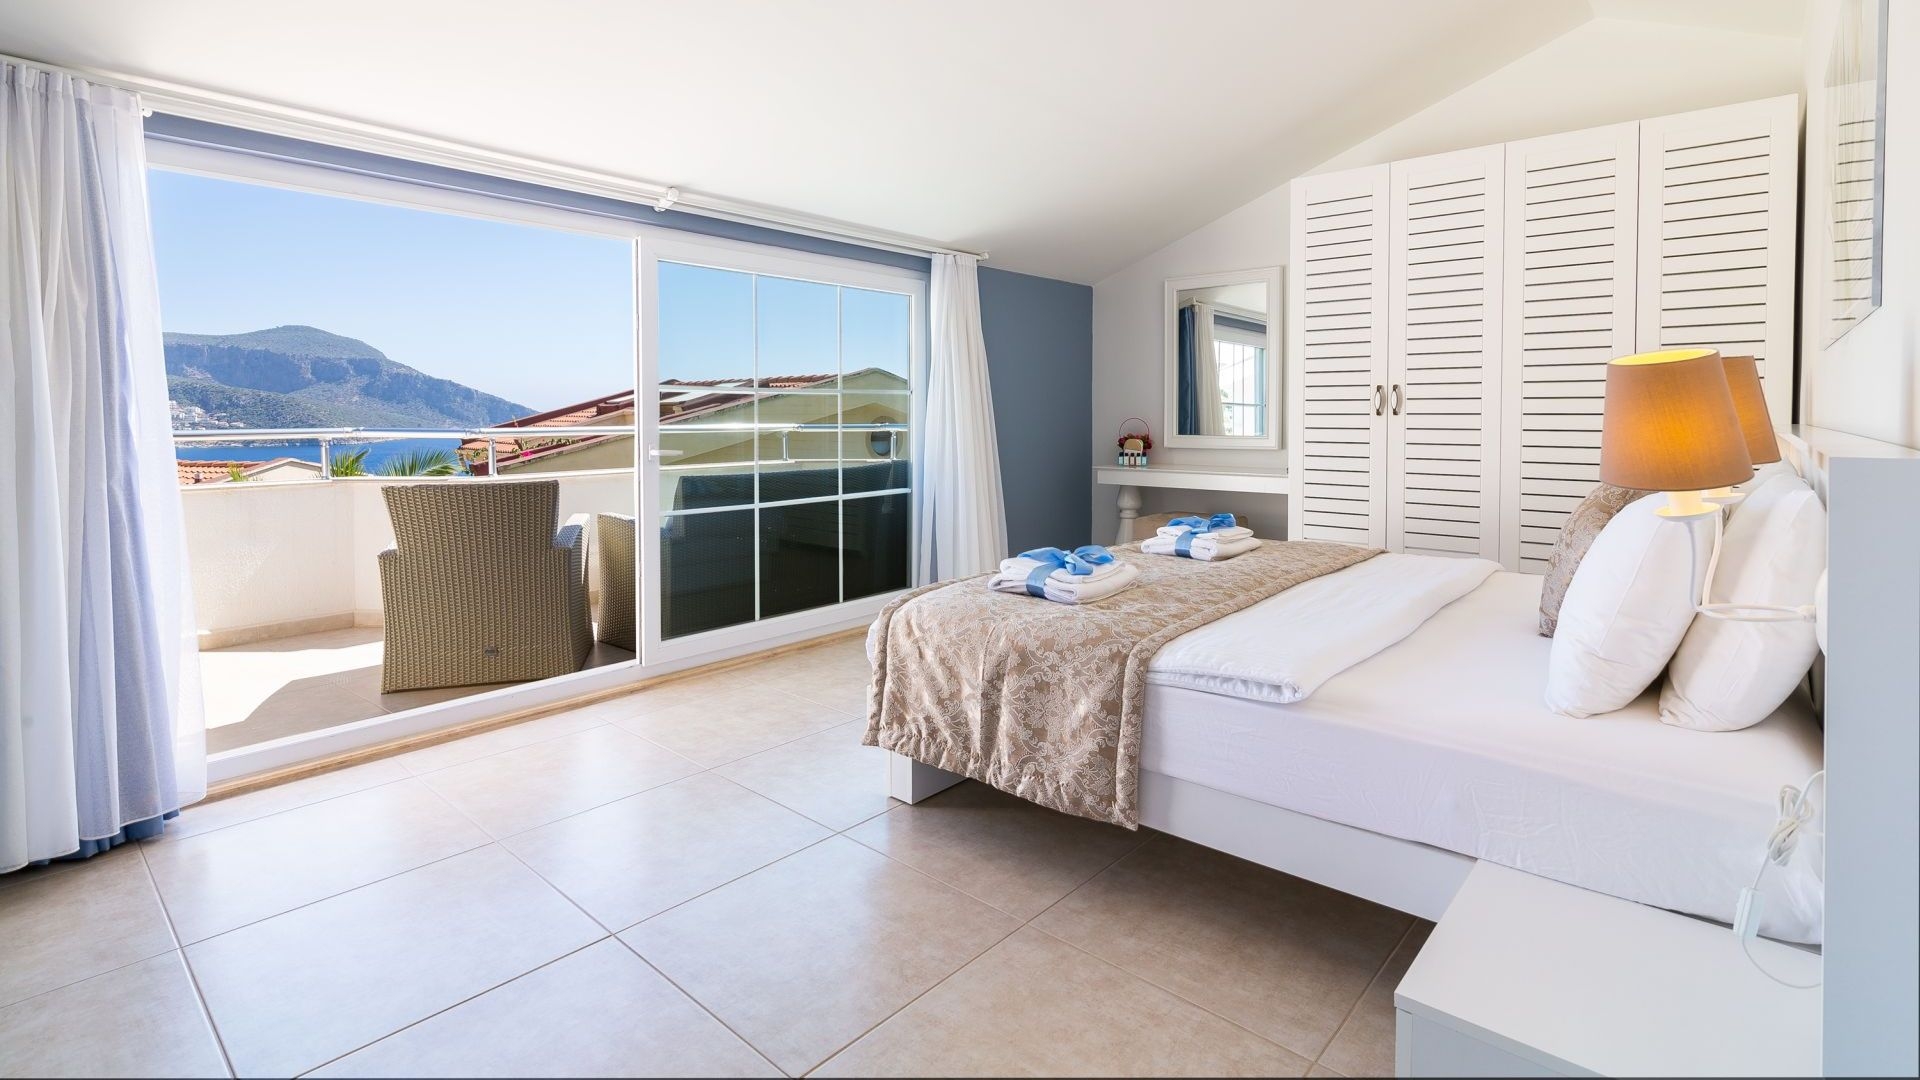 The Spacious Room Give a Break to Life - Kalkan | Suites